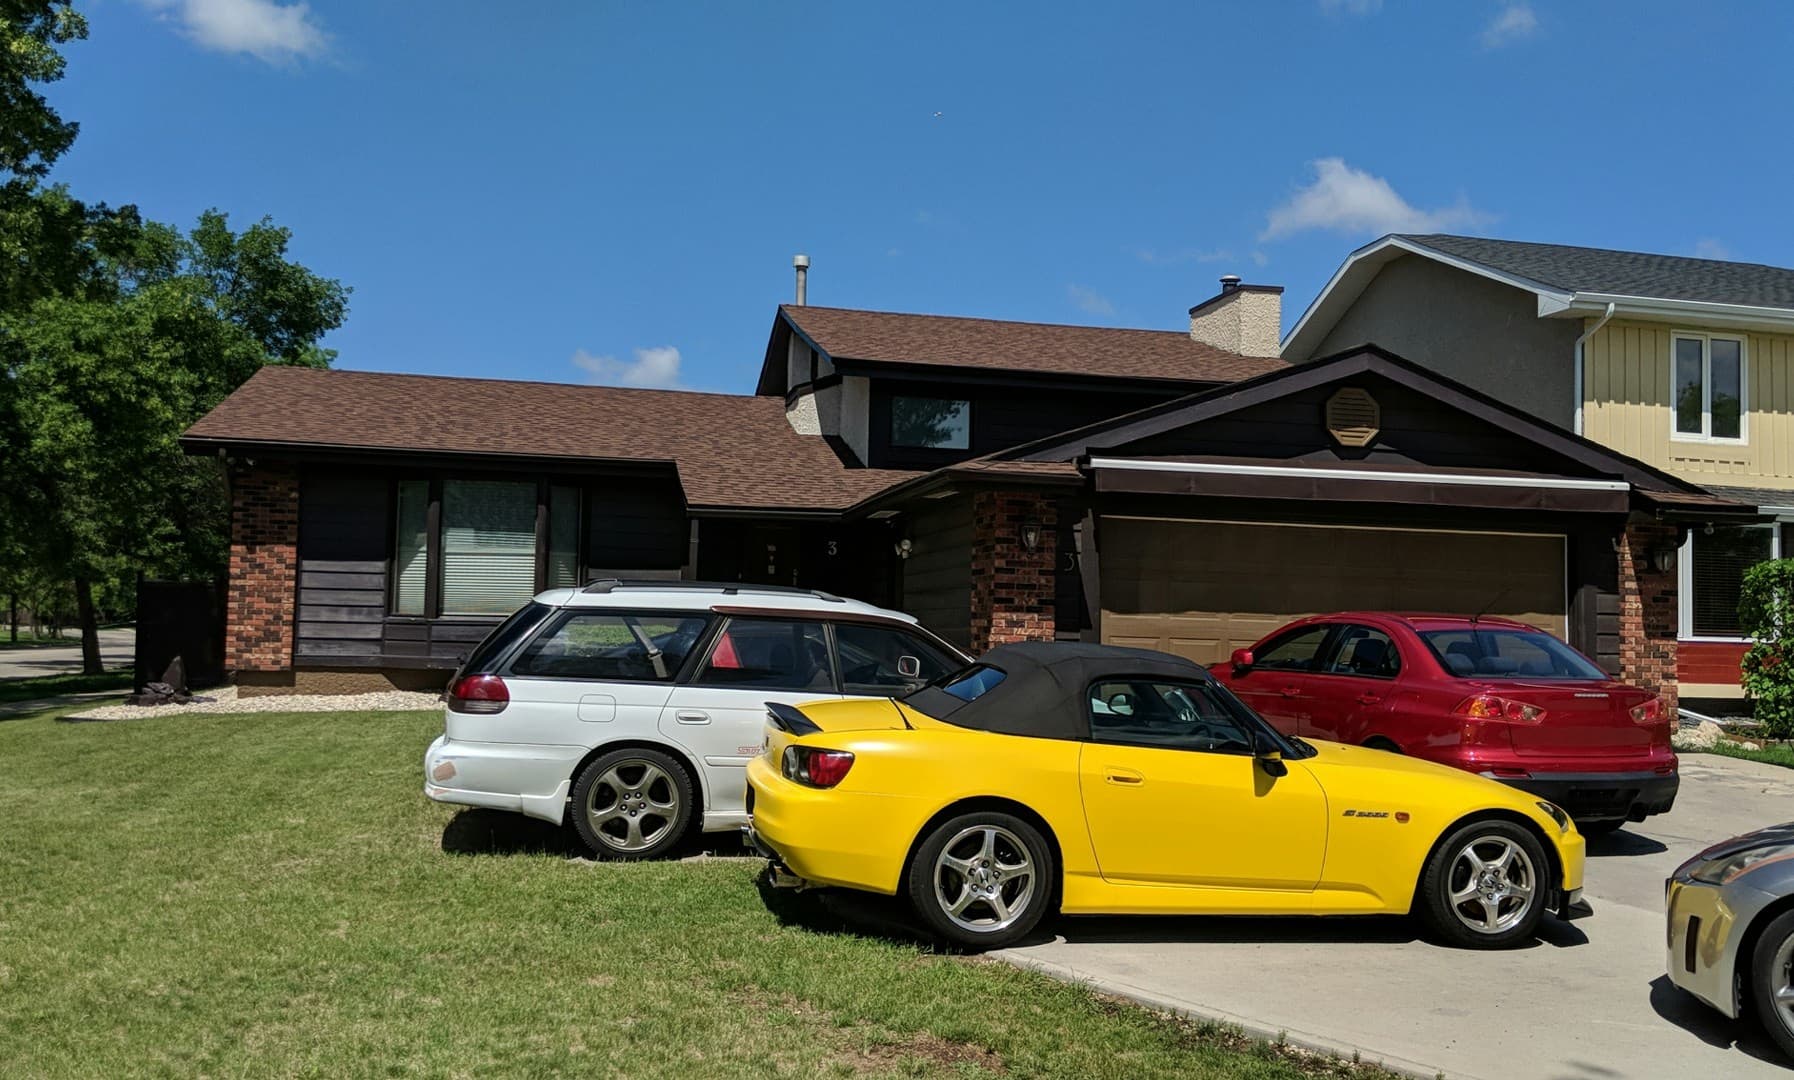 A house with cars